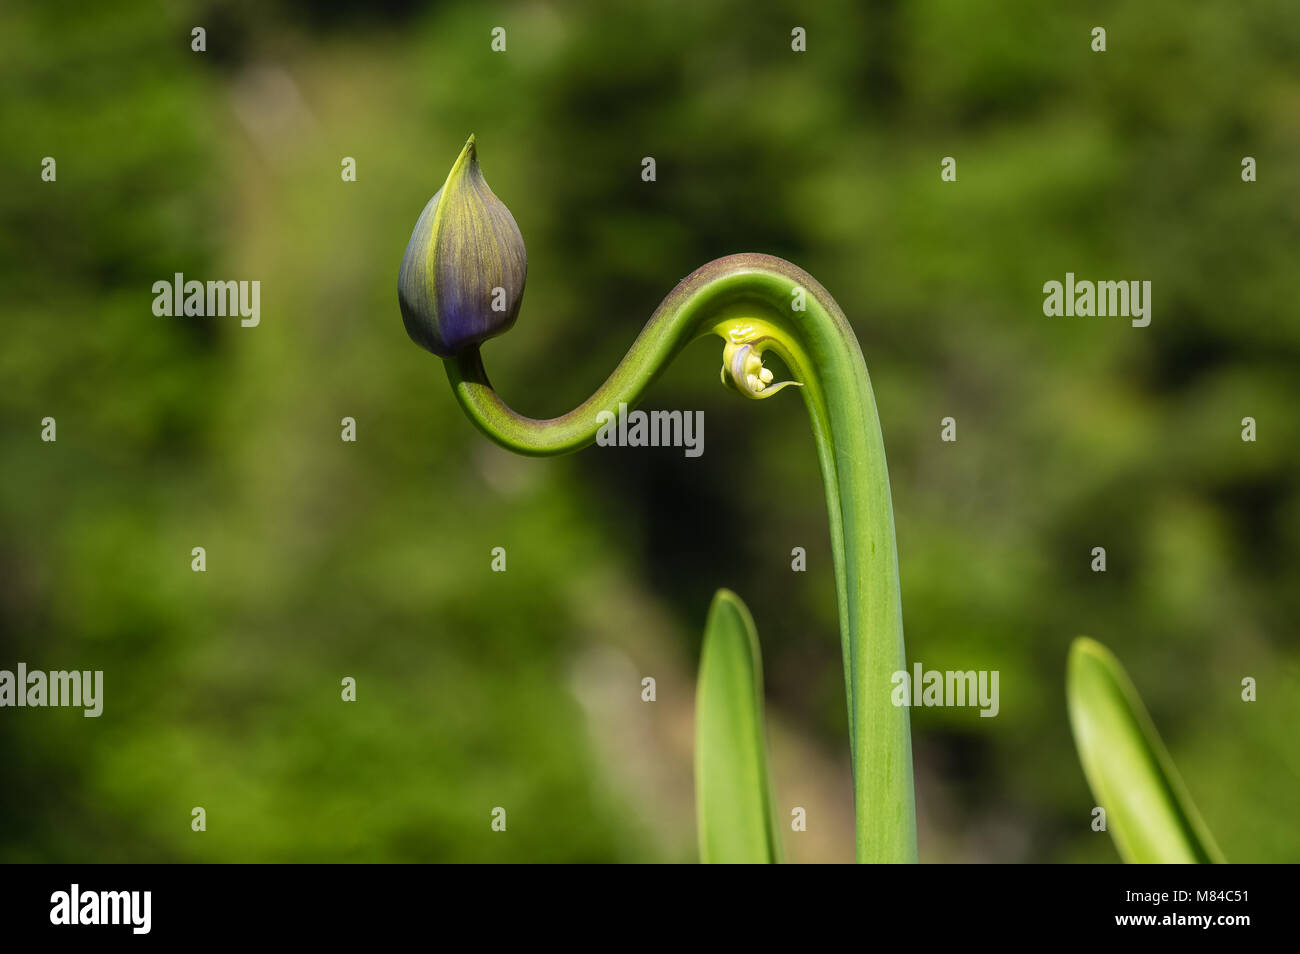 Unusually grown Agapanthus, blurred background Stock Photo